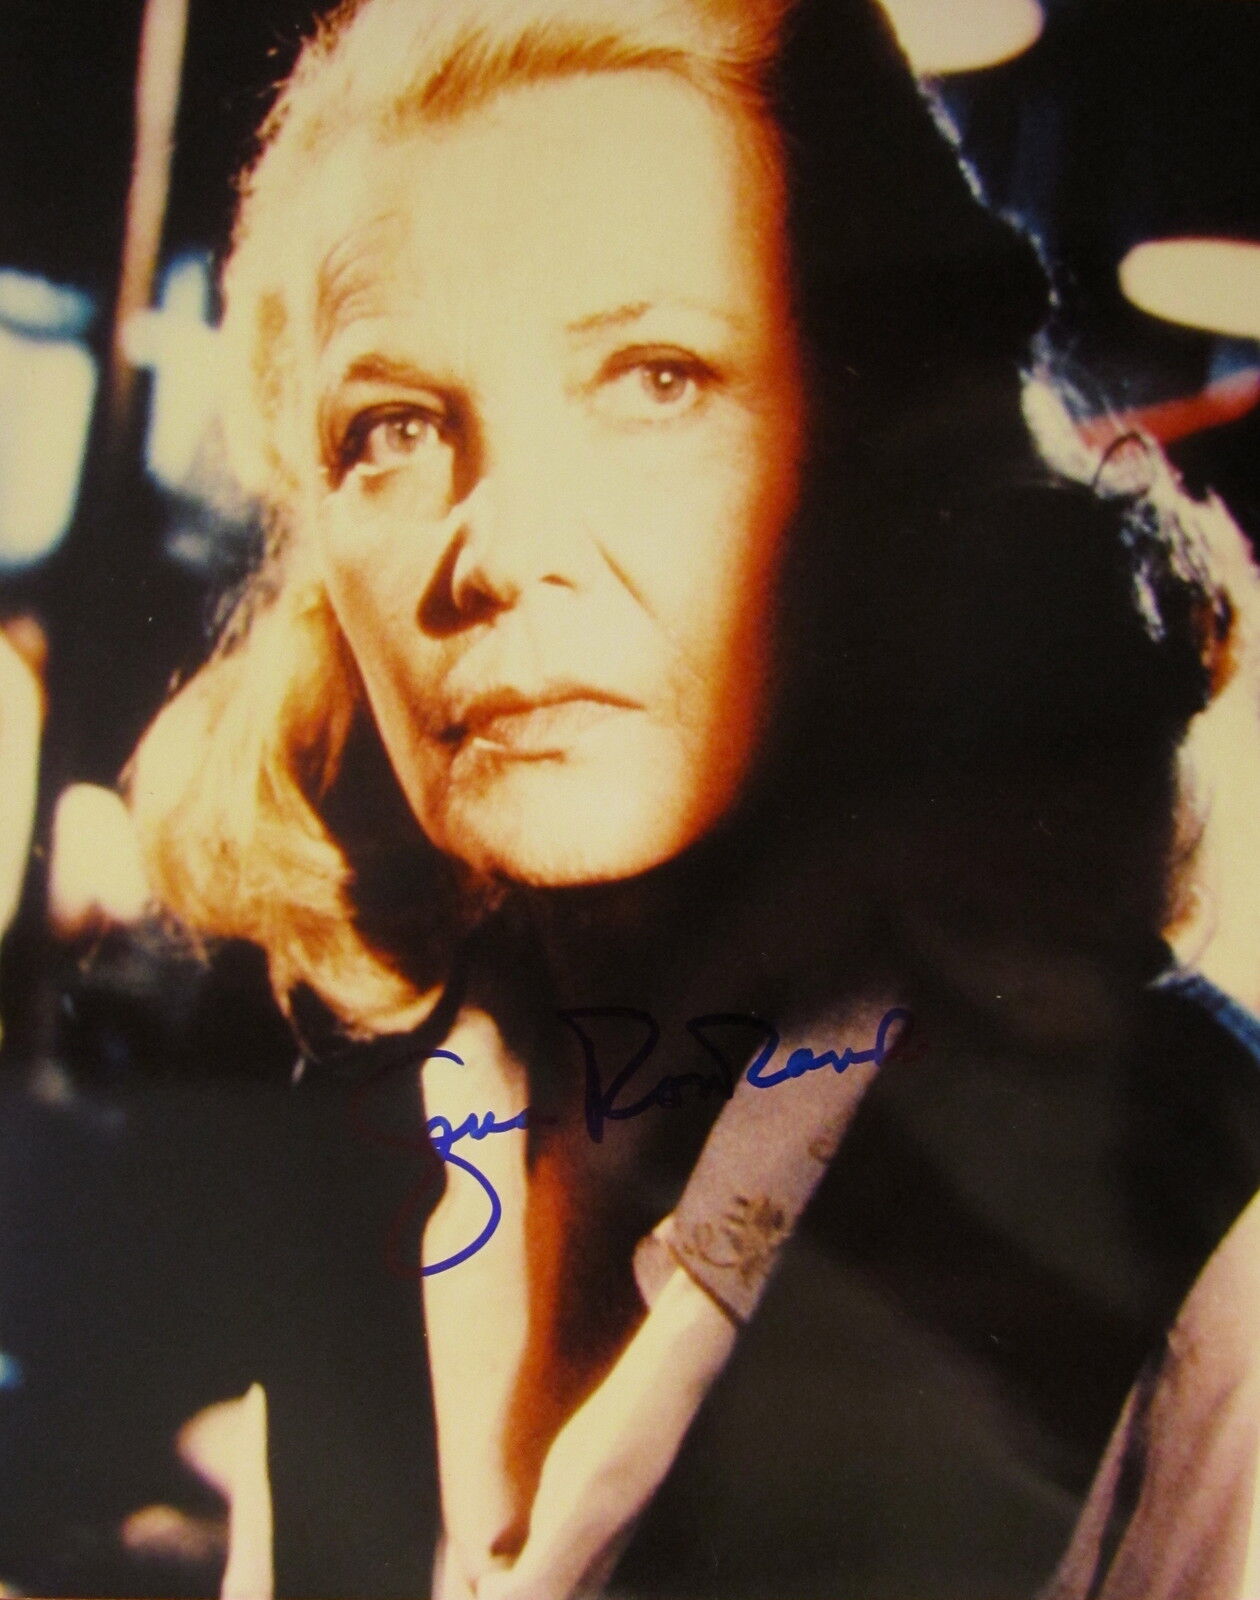 GENA ROWLANDS AUTOGRAPHED Hand SIGNED 8x10 Photo Poster painting MONK PEYTON PLACE w/COA